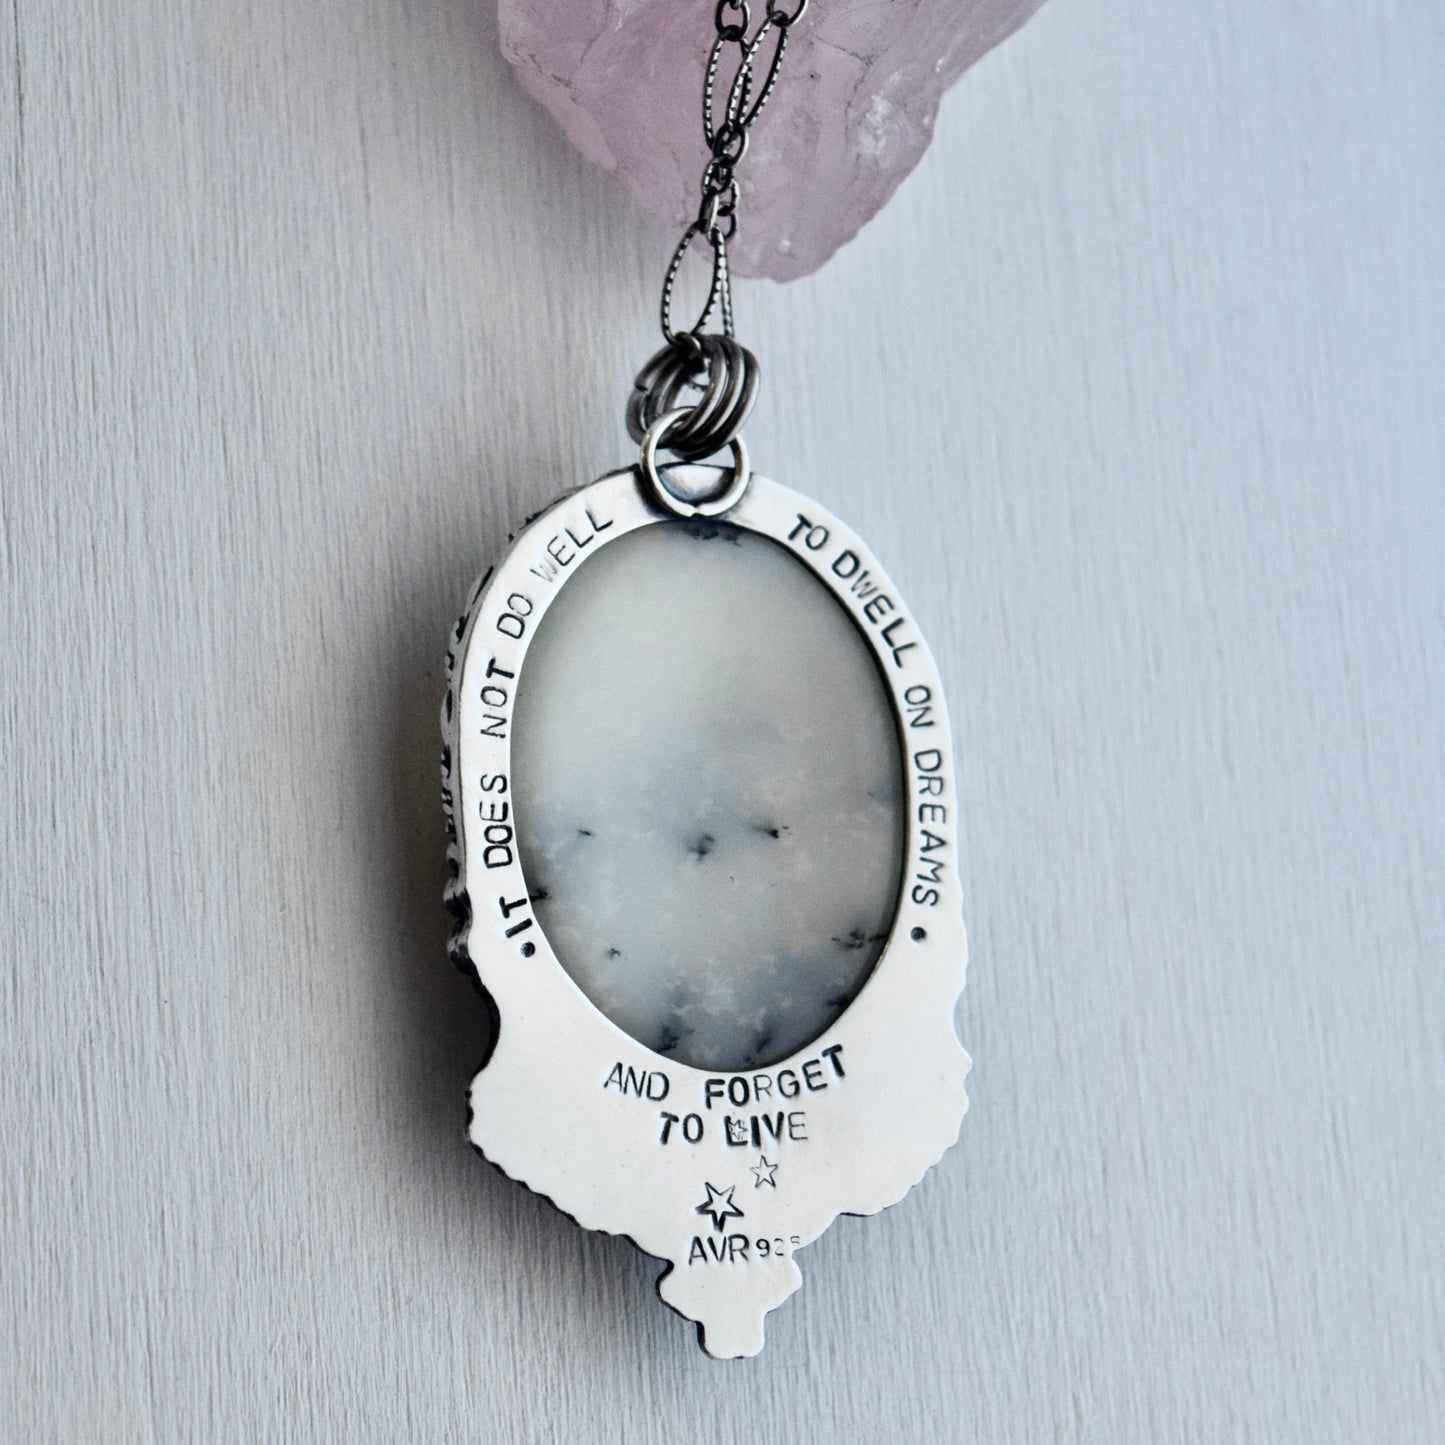 Celestial Owl Worry Stone Pendant with Dendritic Agate